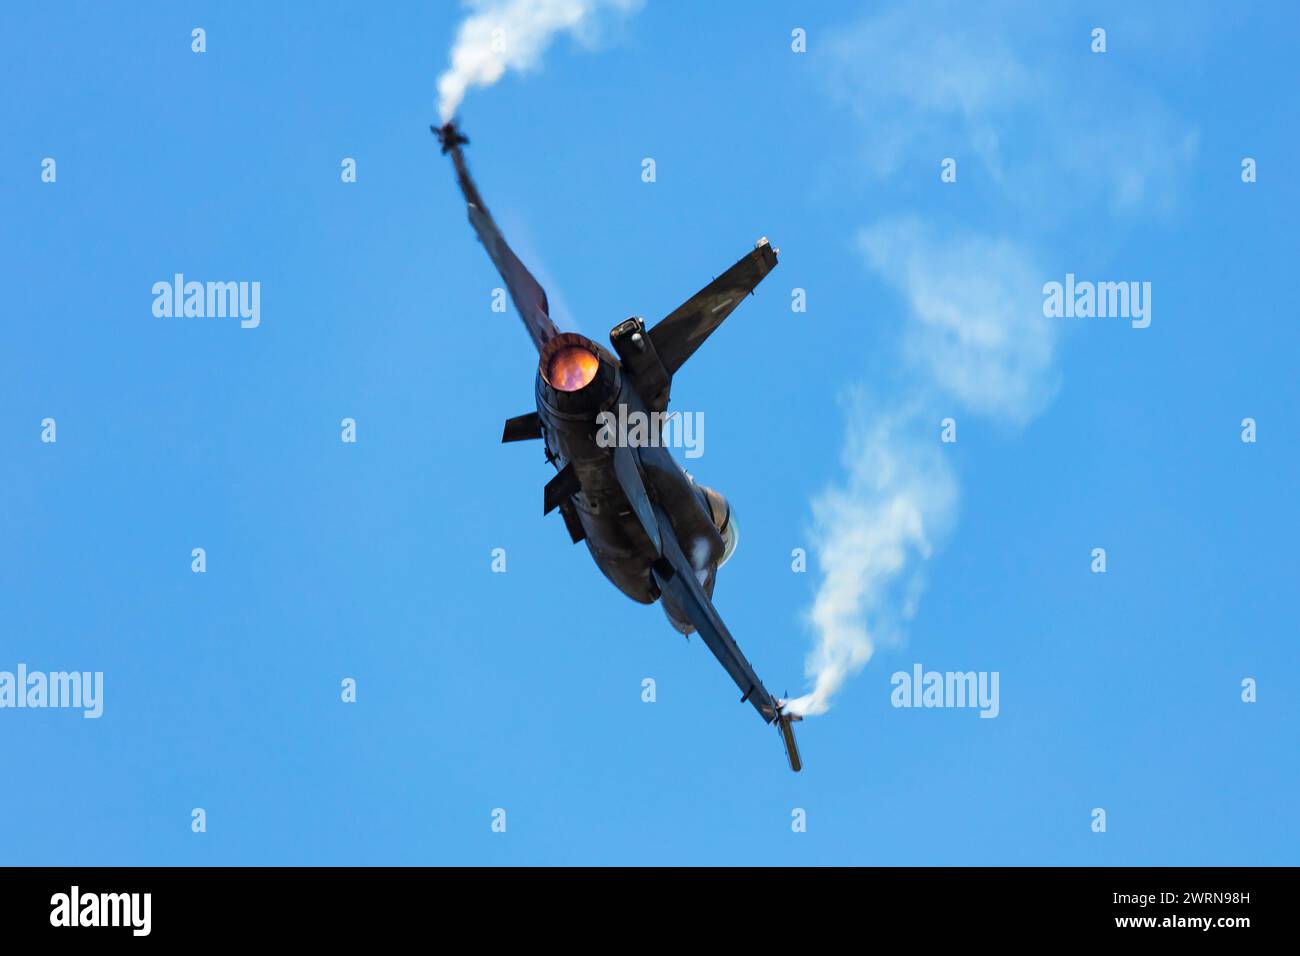 Radom, Poland - August 26, 2023: Hellenic Air Force Lockheed F-16 Fighting Falcon fighter jet plane flying. Aviation and military aircraft. Stock Photo